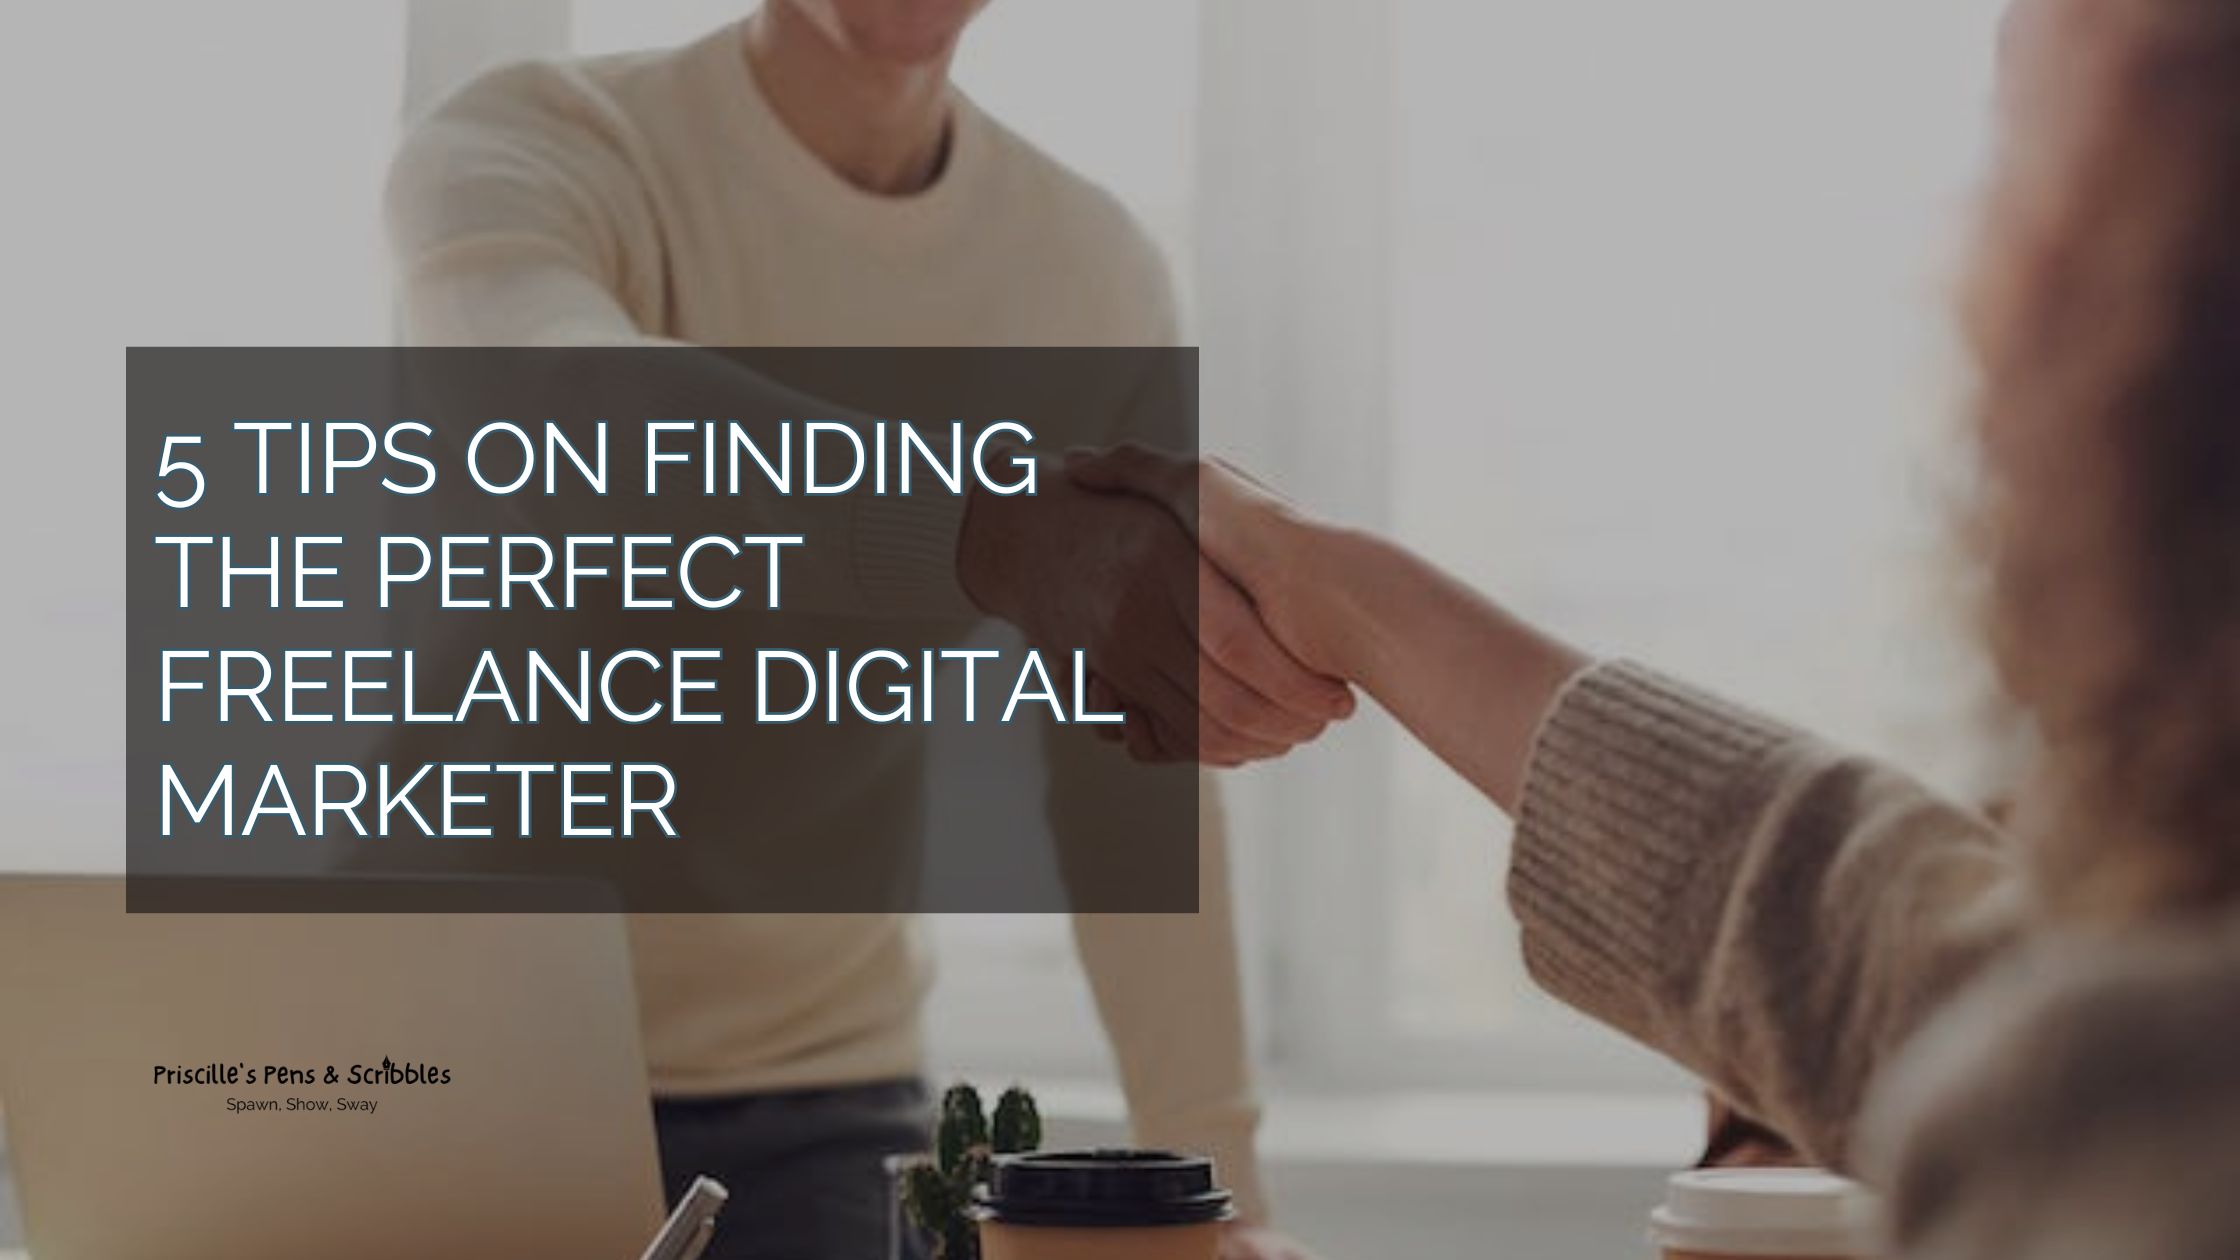 5 tips on finding the perfect freelance Digital Marketer